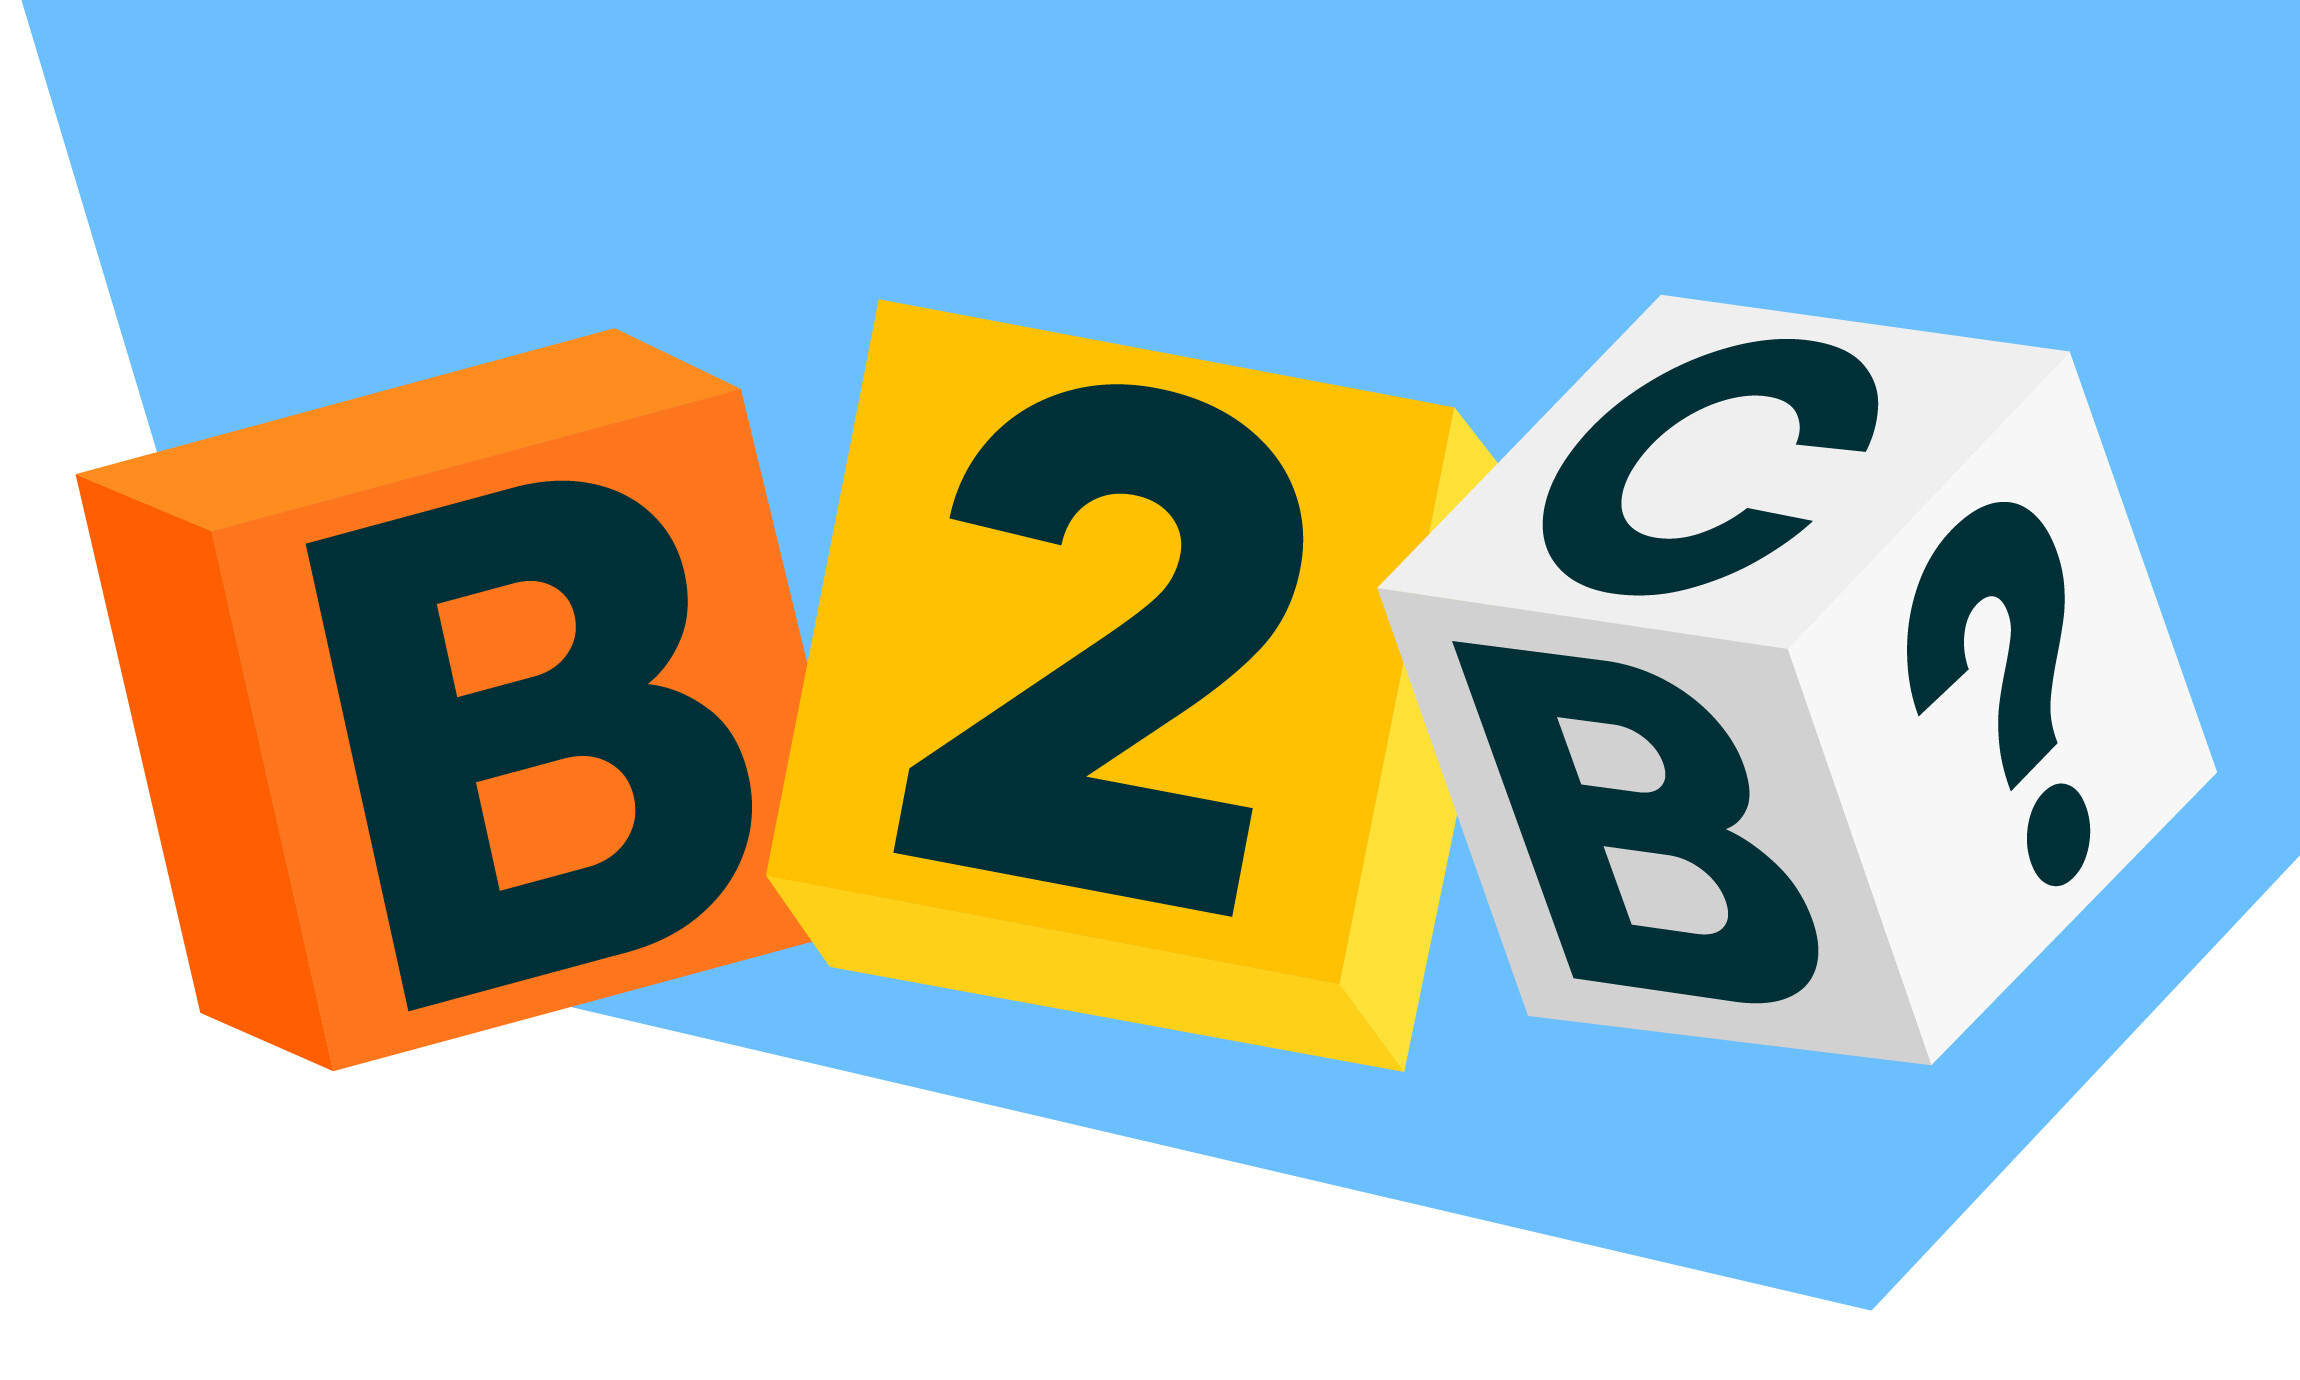 The differences and similarities between B2B and B2C commerce